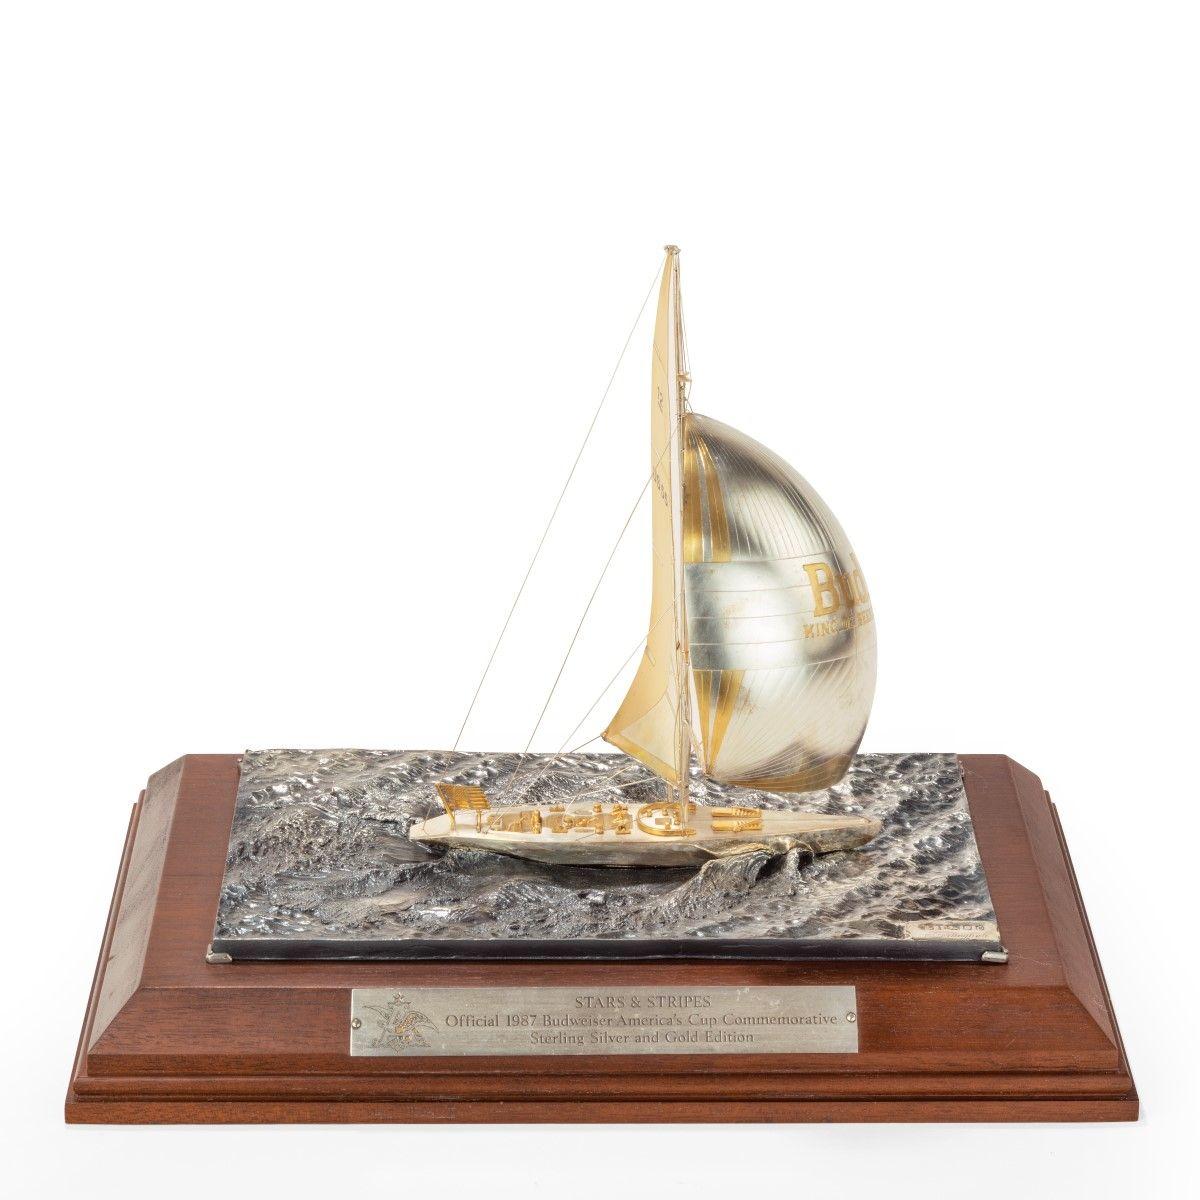 Cased silver and gilt model of 12 Meter America’s Cup yacht Stars & Stripes 87